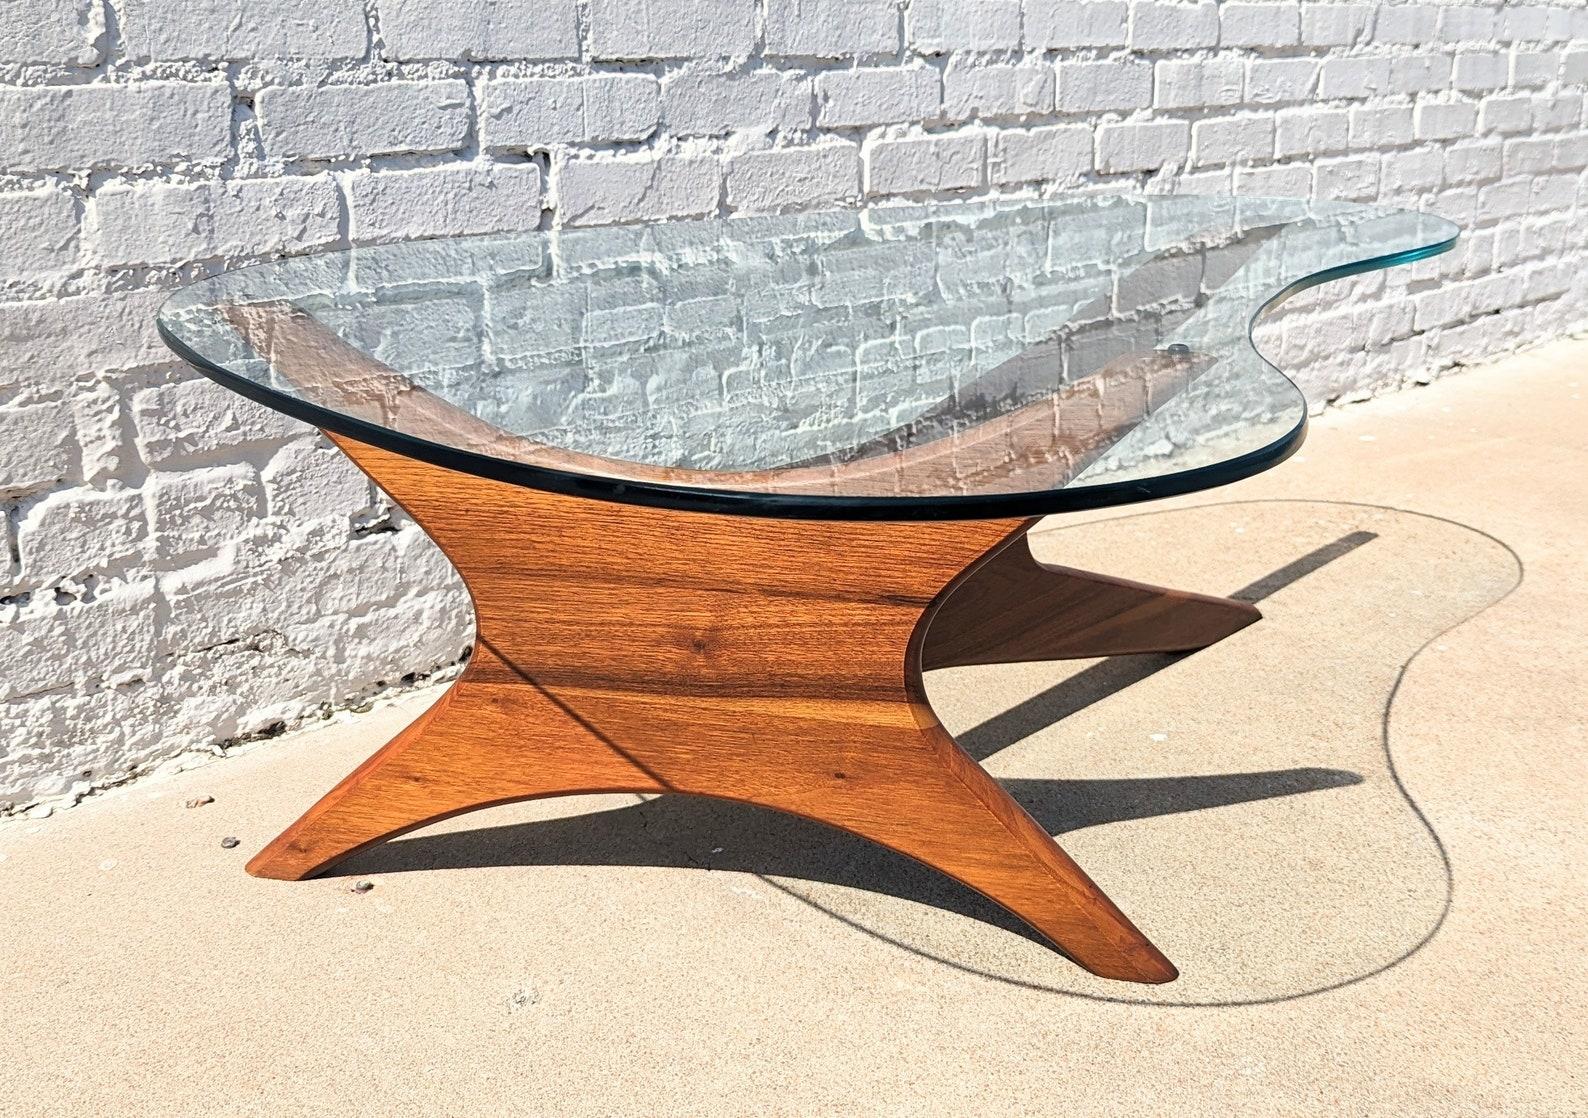 Mid Century Modern Adrian Pearsall Jacks Coffee Table

Above average vintage condition and structurally sound. Has some expected slight finish wear and scratching on frame. Glass has some surface scratching and a couple deeper scratches but no chips